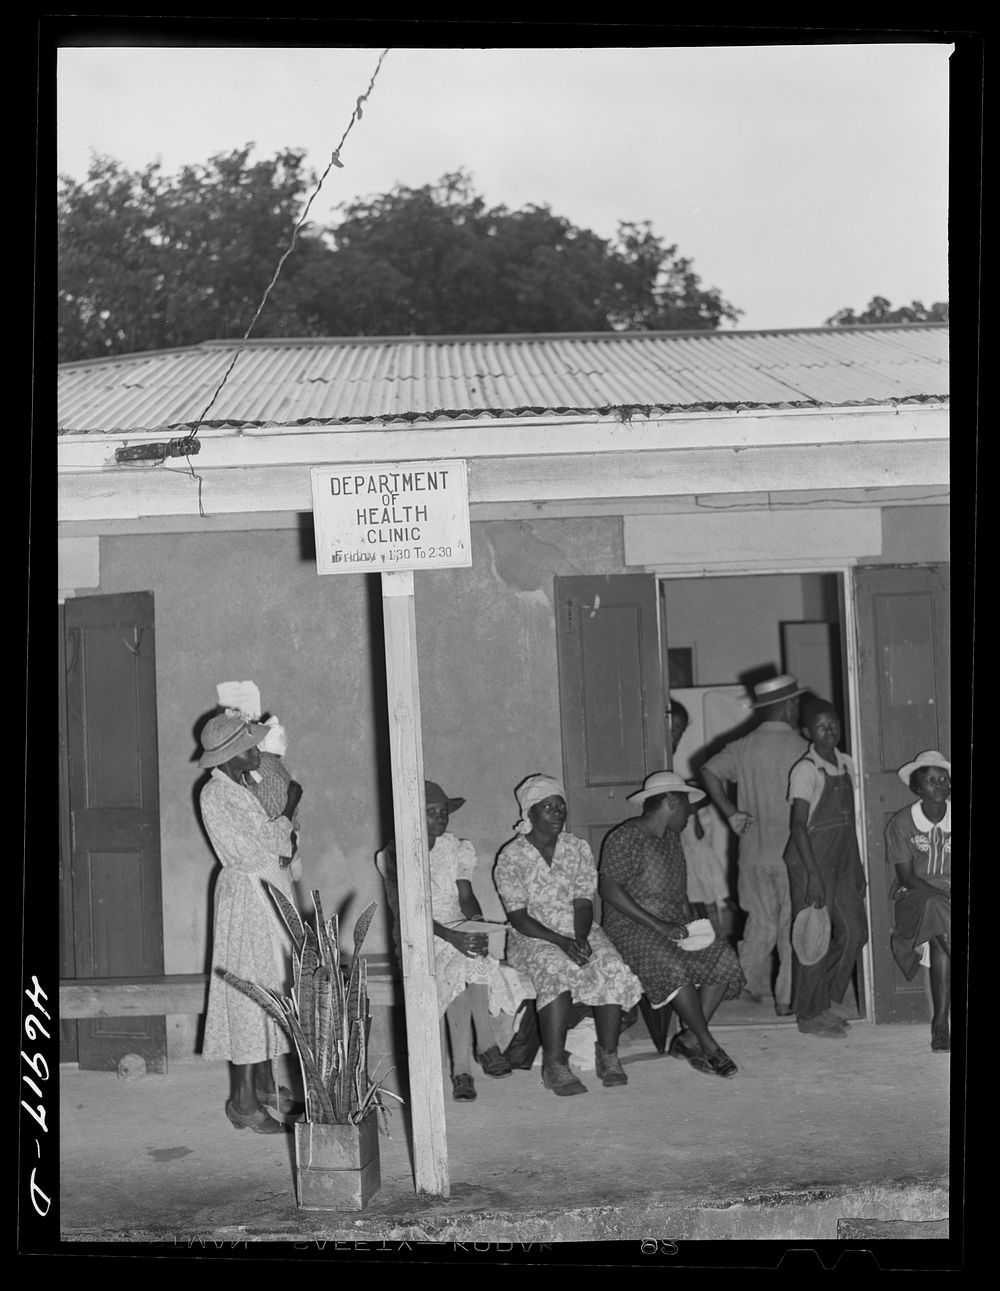 Frederiksted (vicinity), Saint Croix Island, Virgin Islands. Public health clinic. Sourced from the Library of Congress.